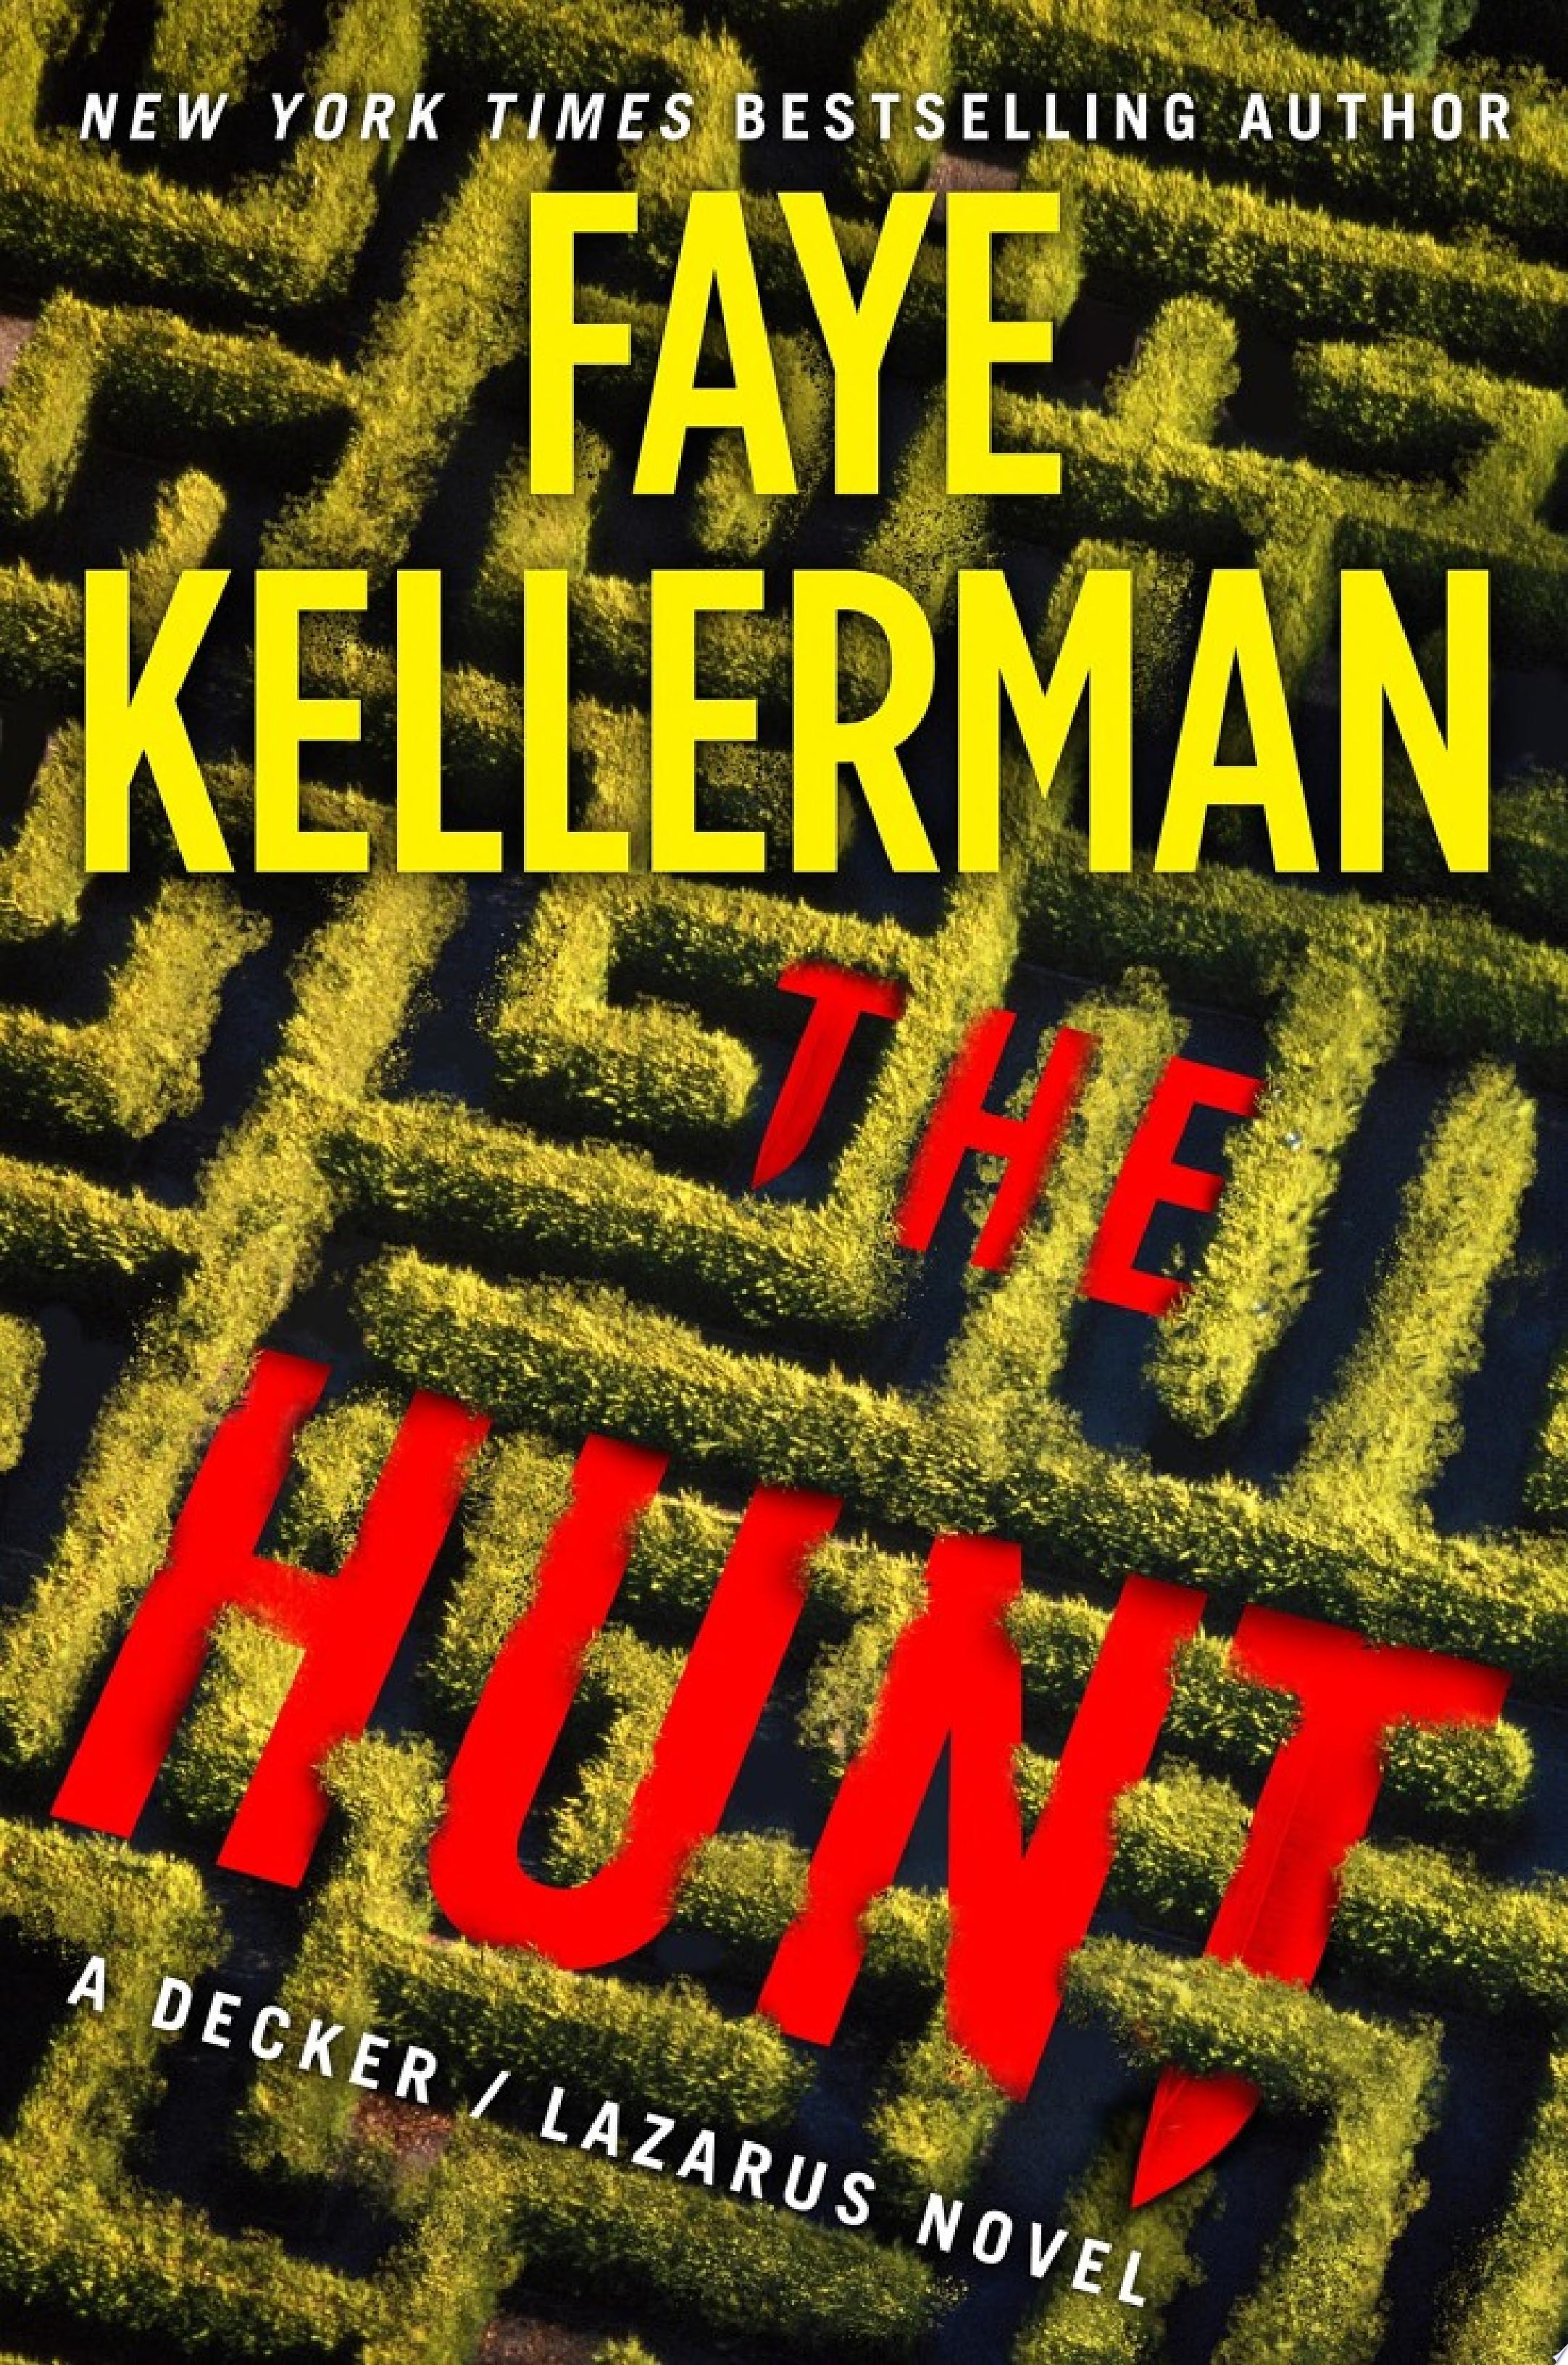 Image for "The Hunt"